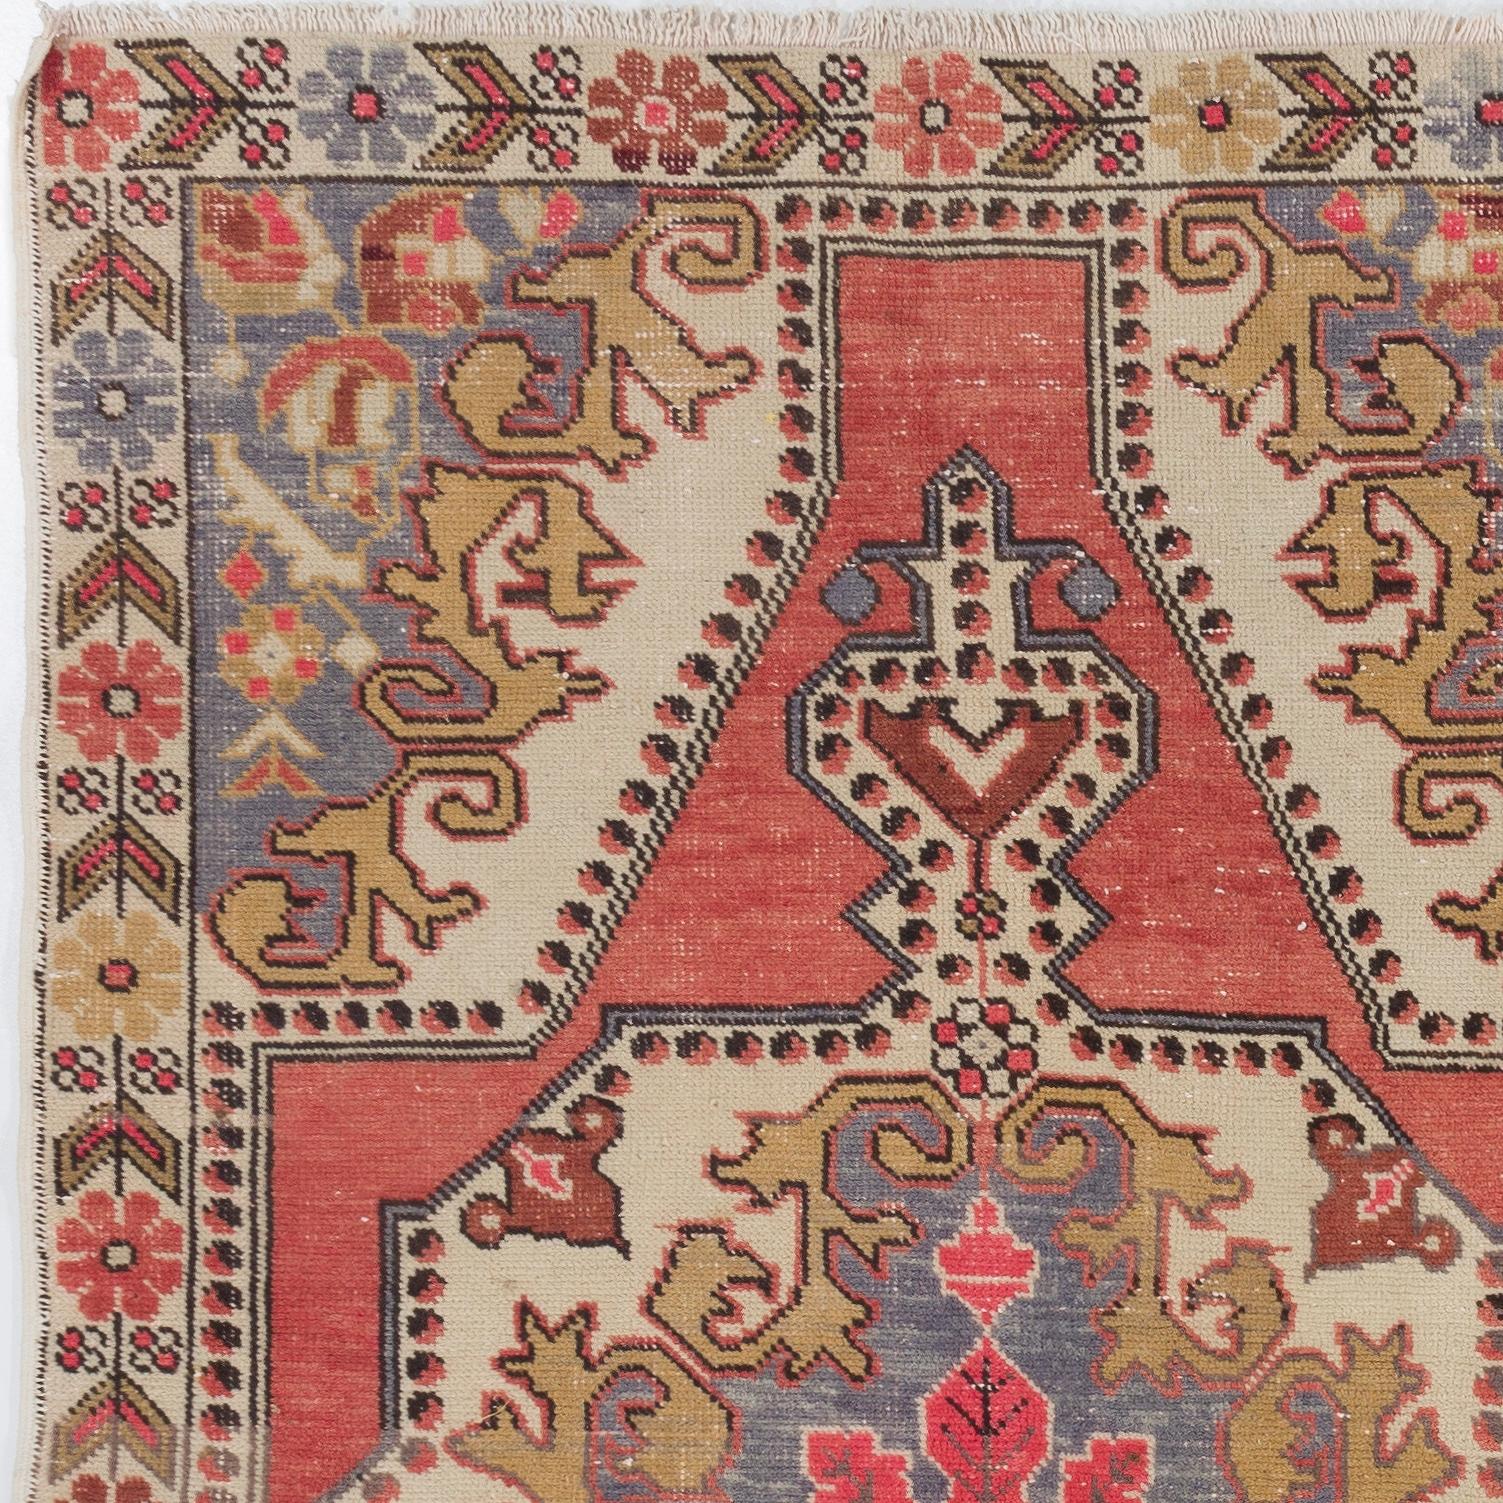 Bohemian 4.2x7.2 Ft Vintage Handmade Turkish Rug in Red with Medallion Design. Ca 1960 For Sale